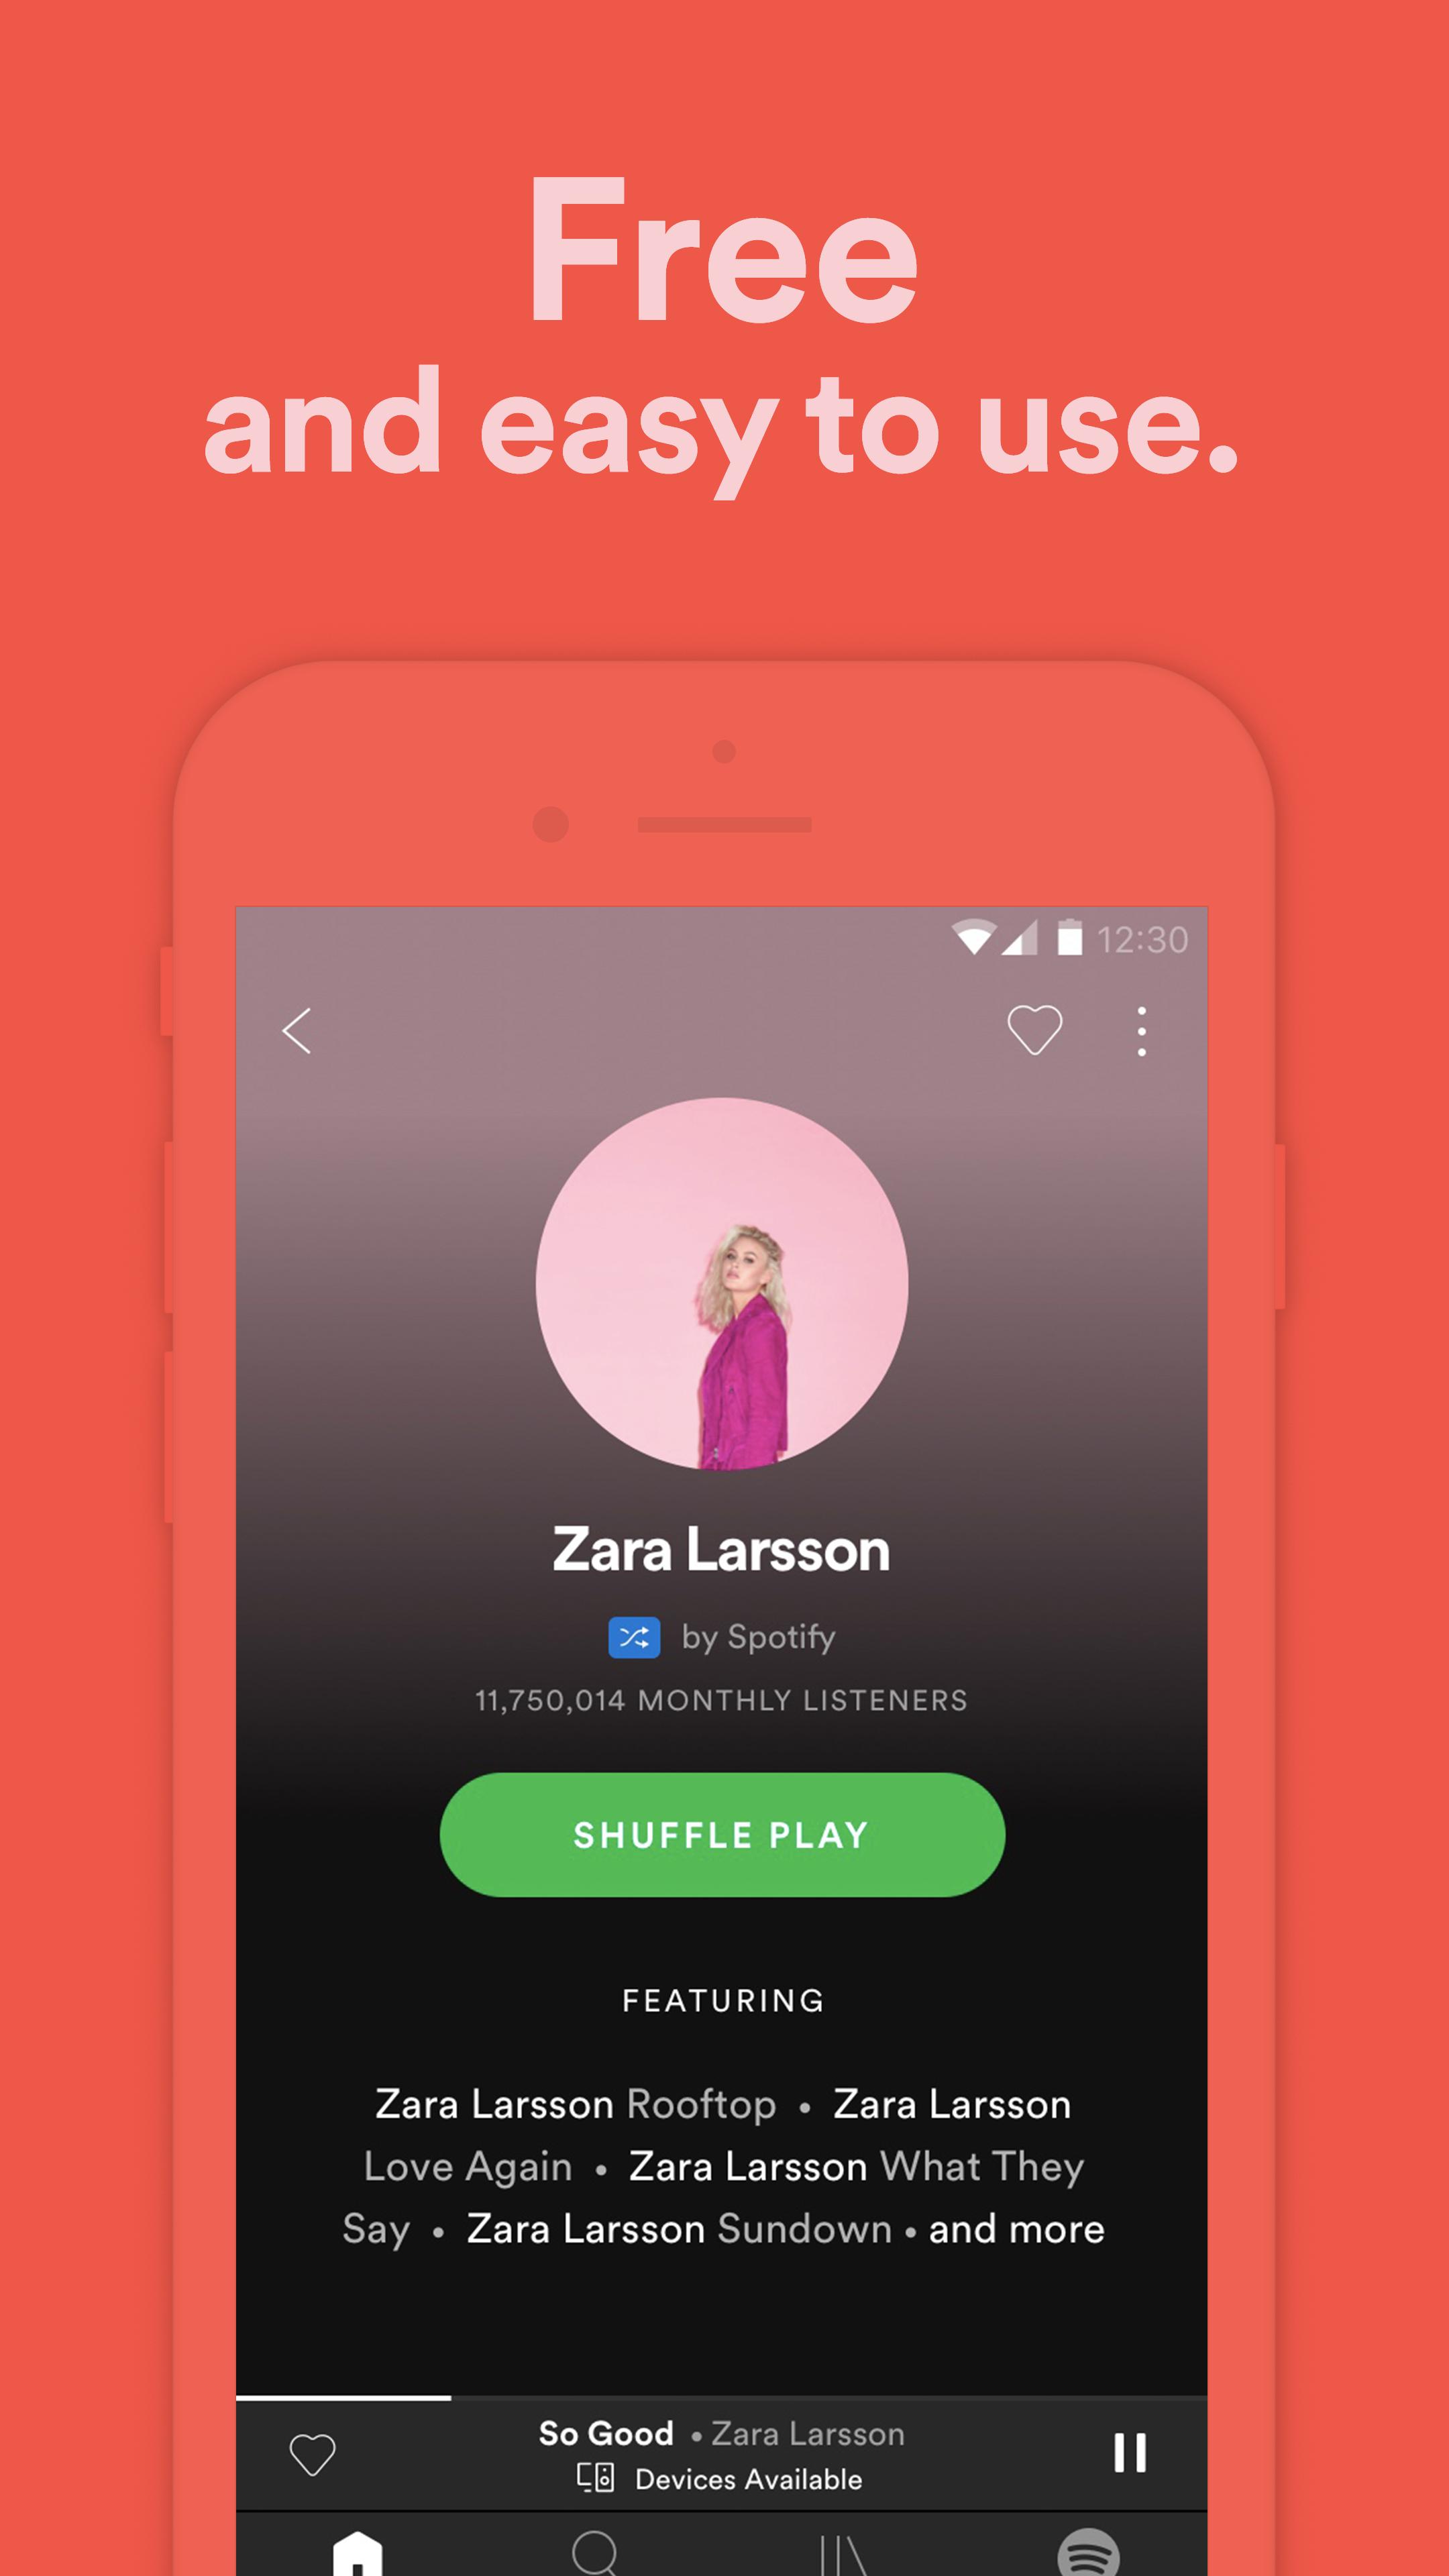 Apk File For Spotify